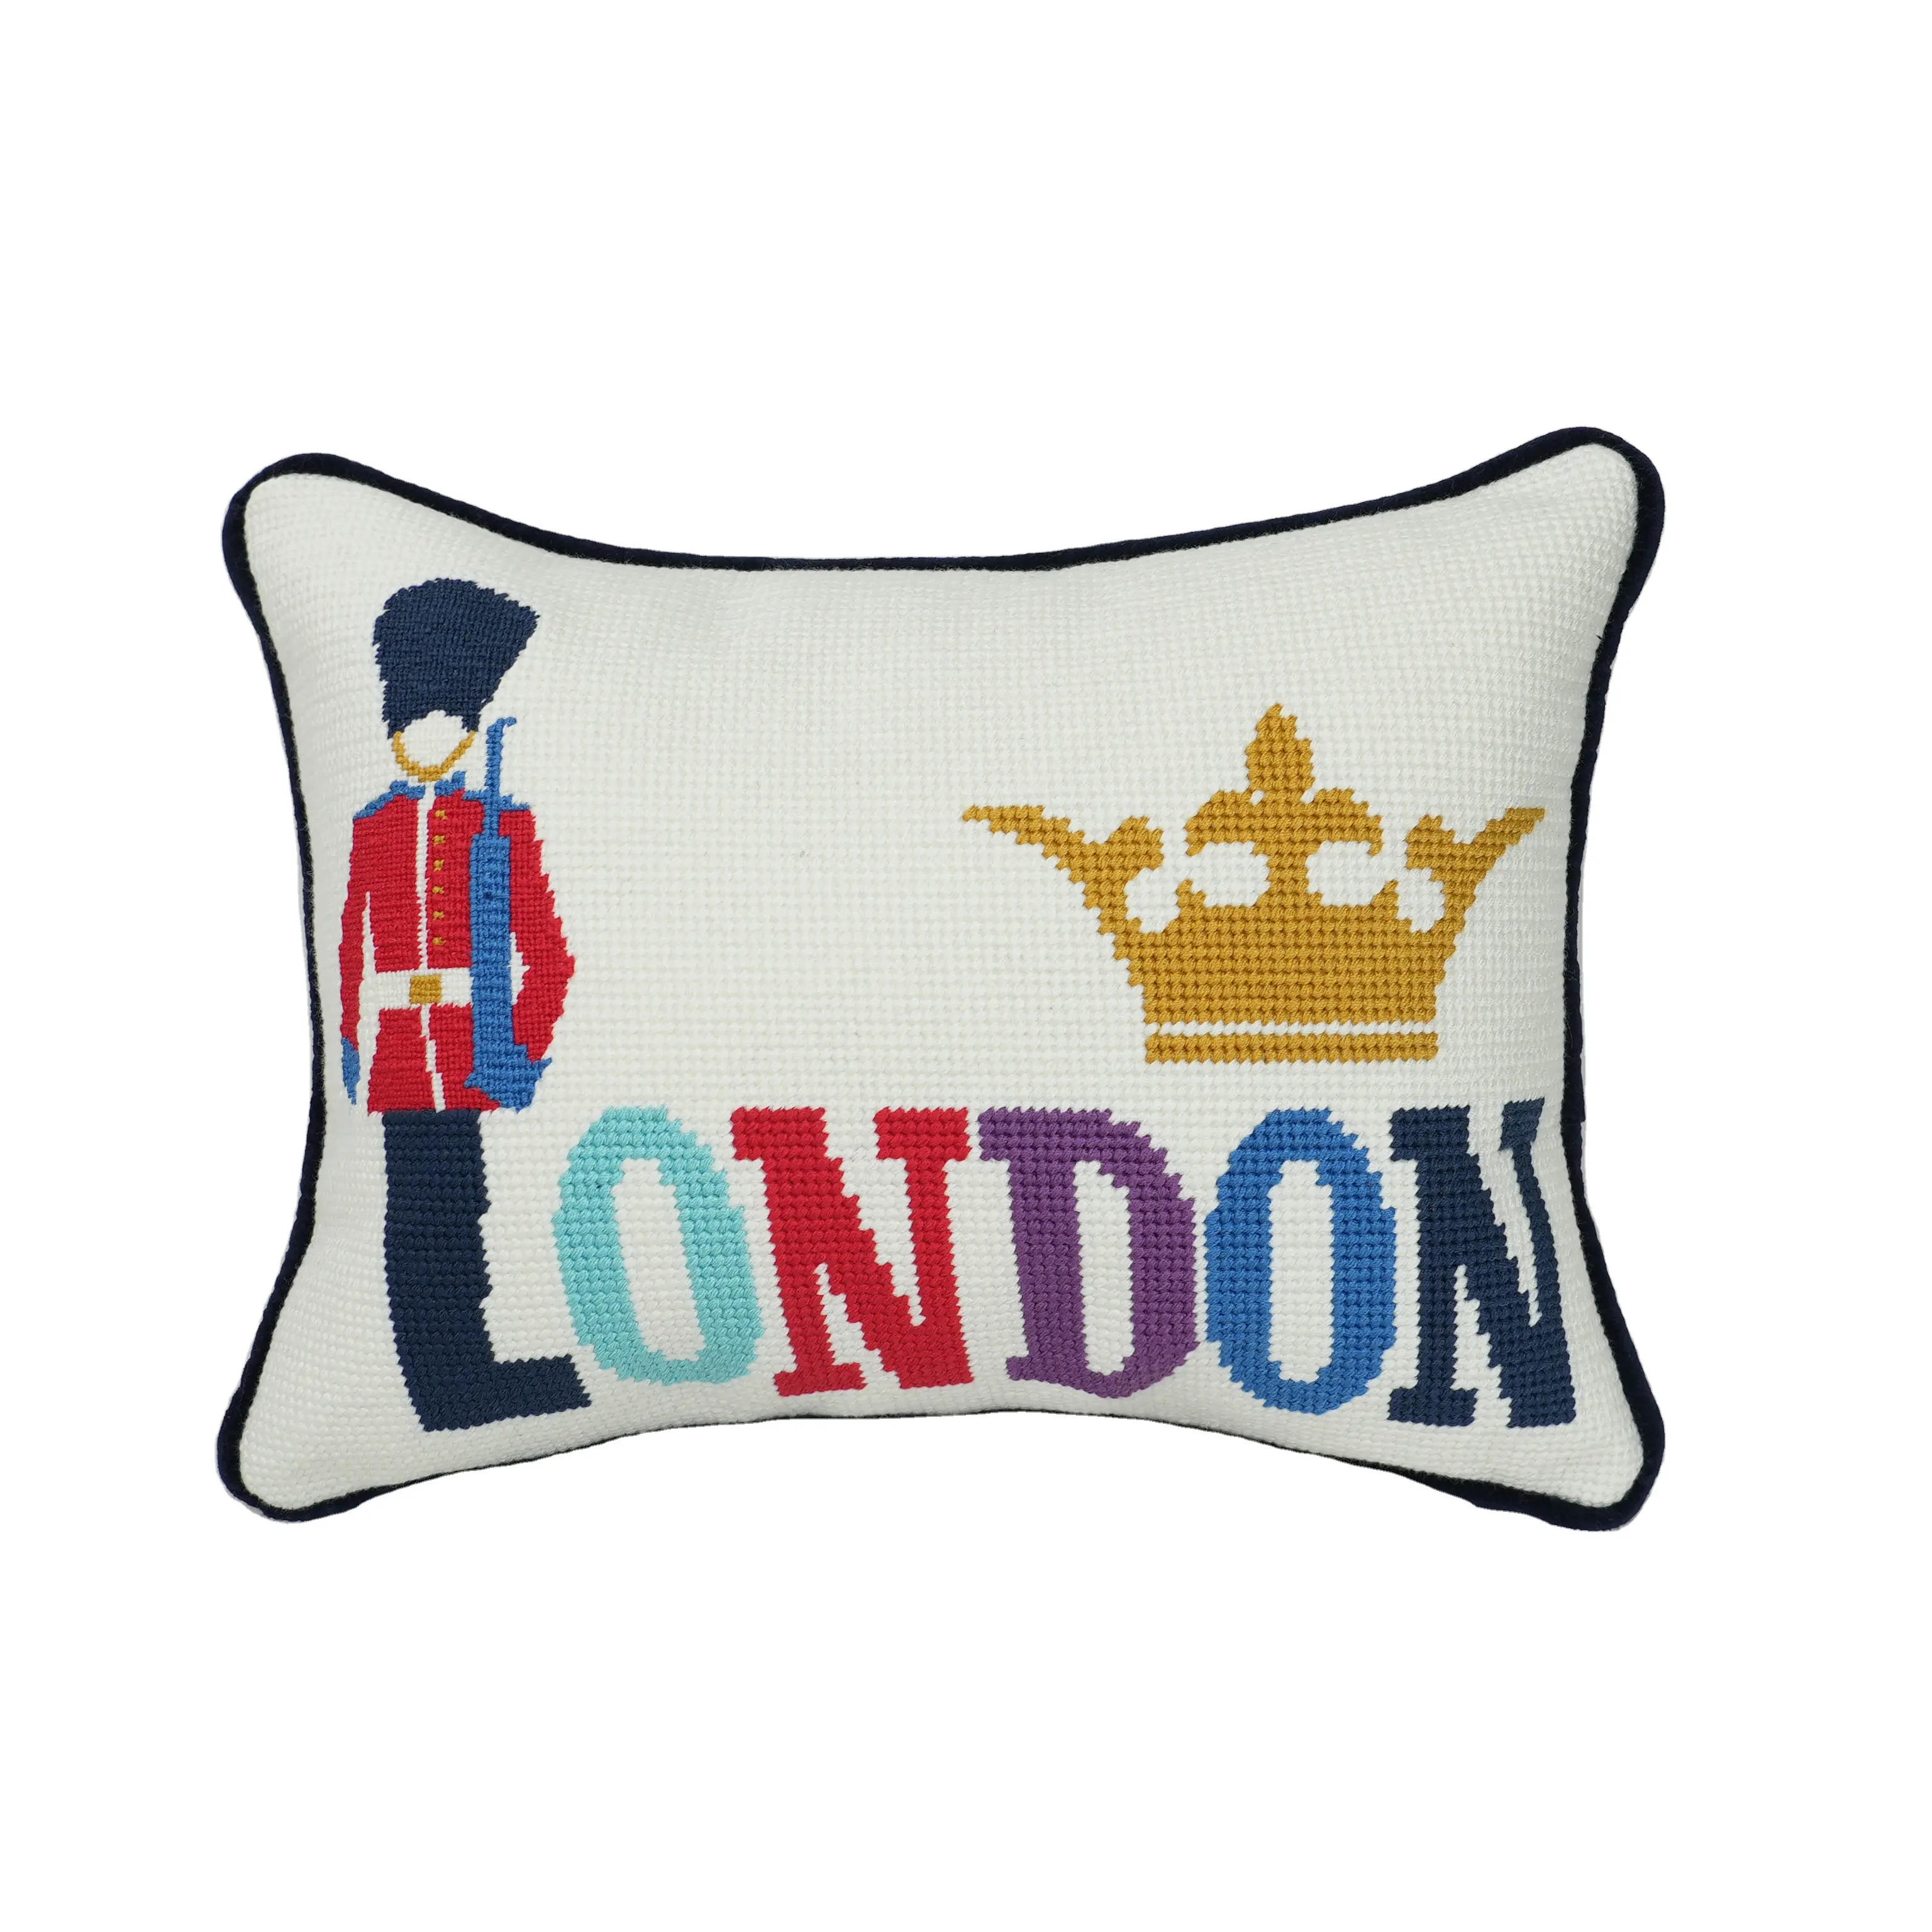 SHN082 London Letter Home Decorative cushion cover Custom Design Embroidery Pillow Cover Needlepoint Pillow